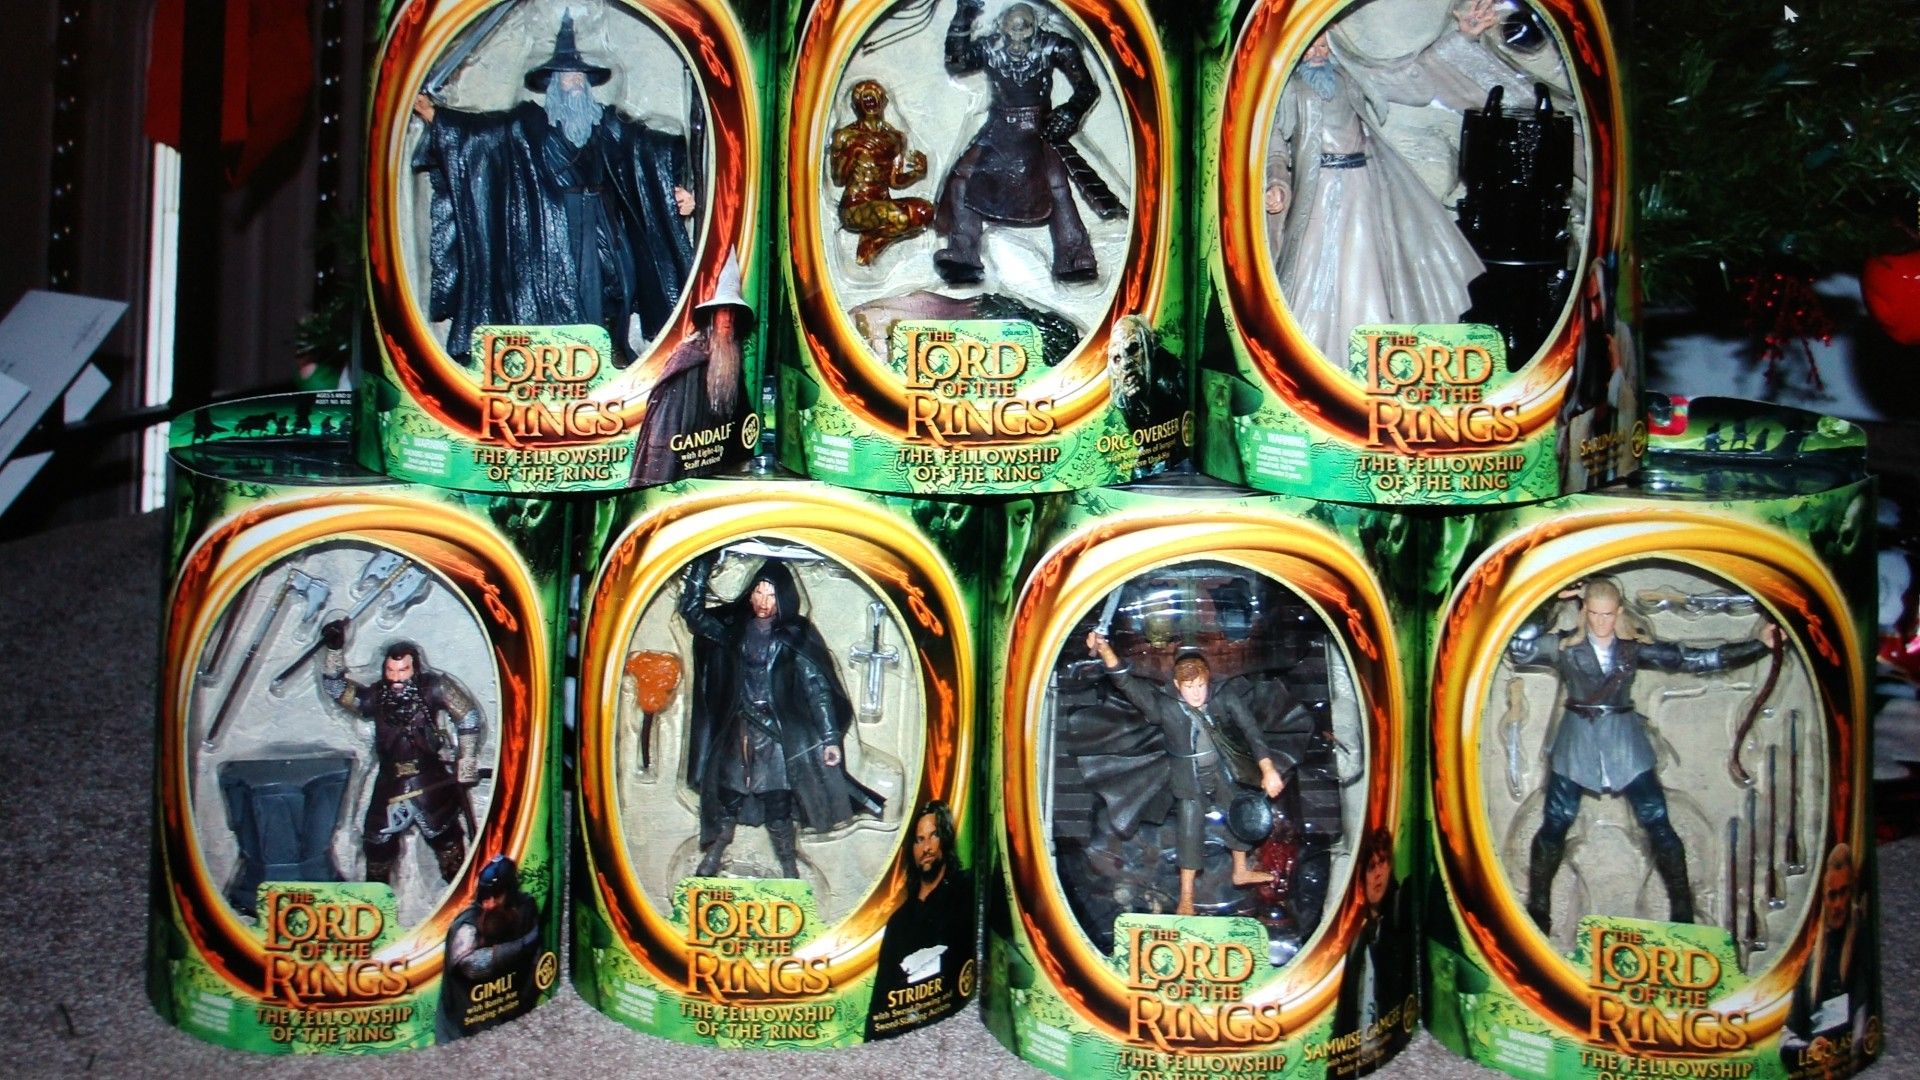 Lord of the Rings - Fellowship of the Ring Action figure collectibles